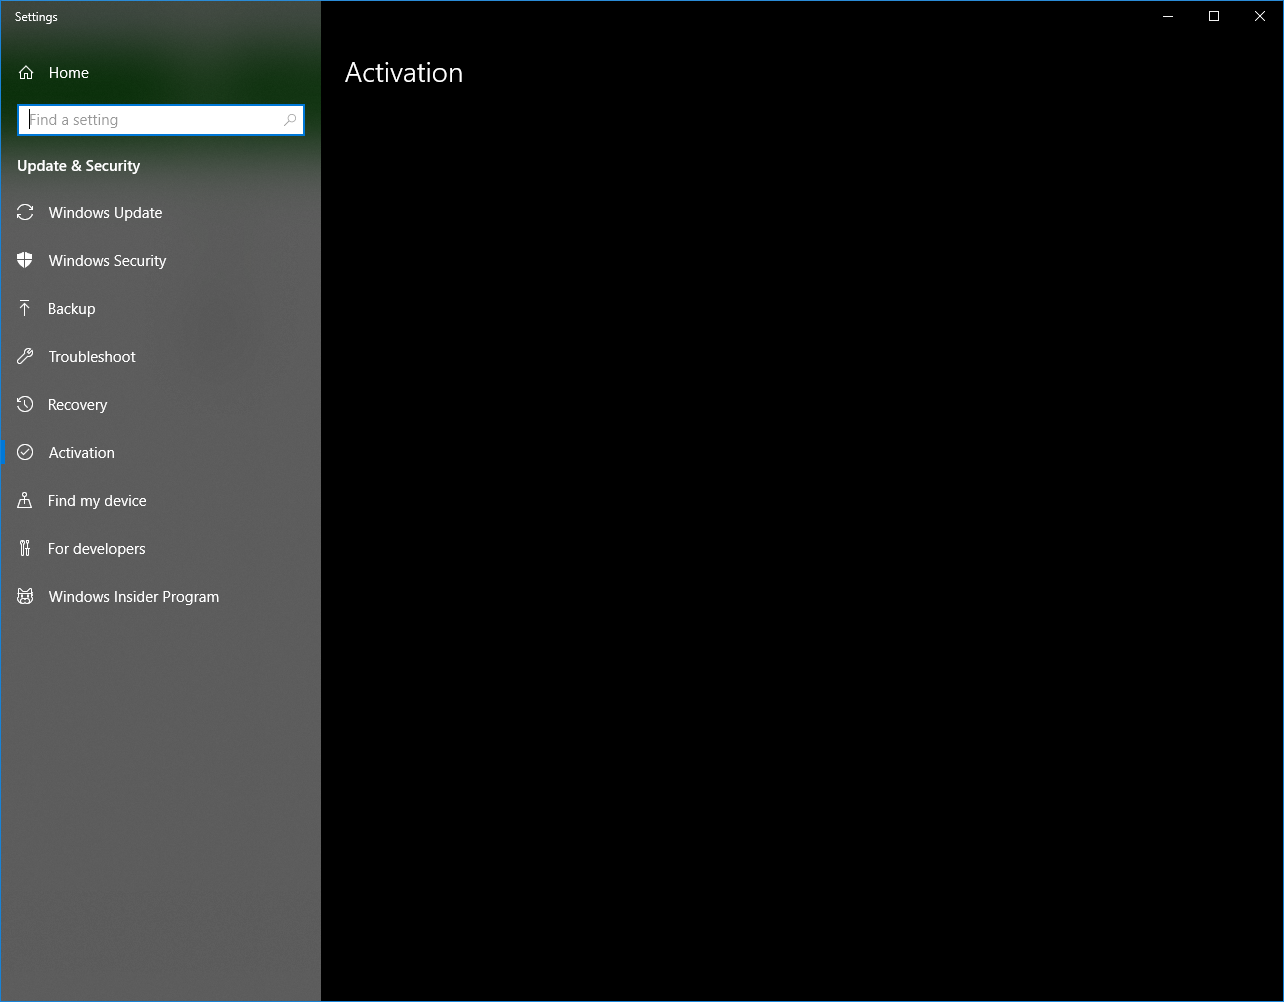 Windows activation screen in settings is blank, blue activation screen pops up repeatedly 974f9ea8-abc9-4fe6-9b06-0b0f3059aa63?upload=true.png